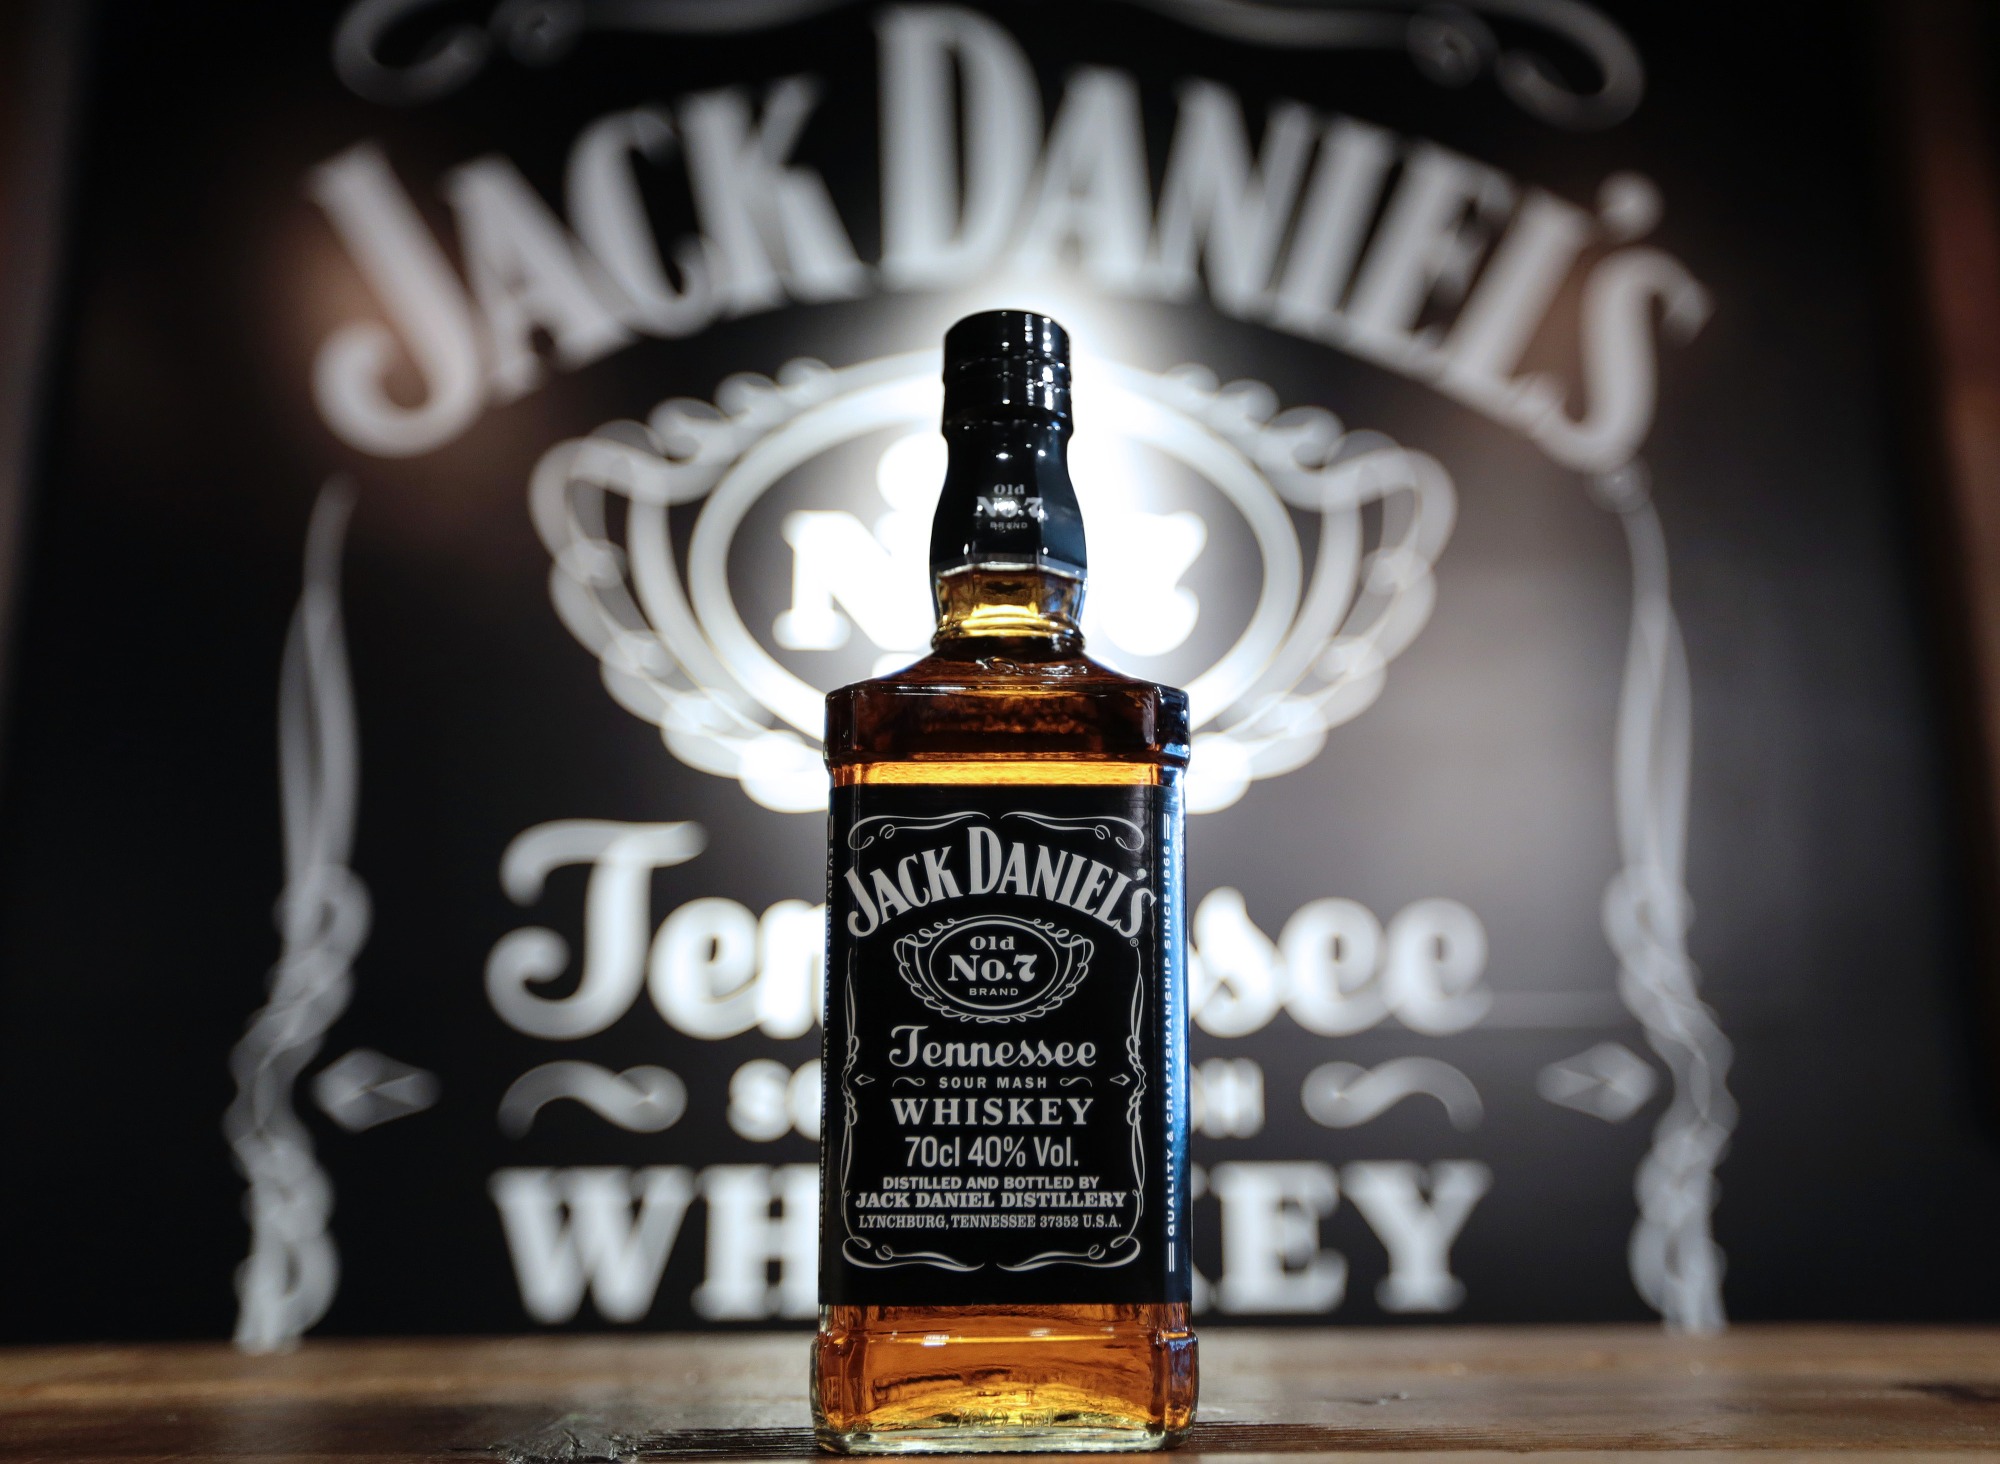 Whiskey-a-no-no: dog toy cannot mimic Jack Daniel's, US supreme court rules, US supreme court